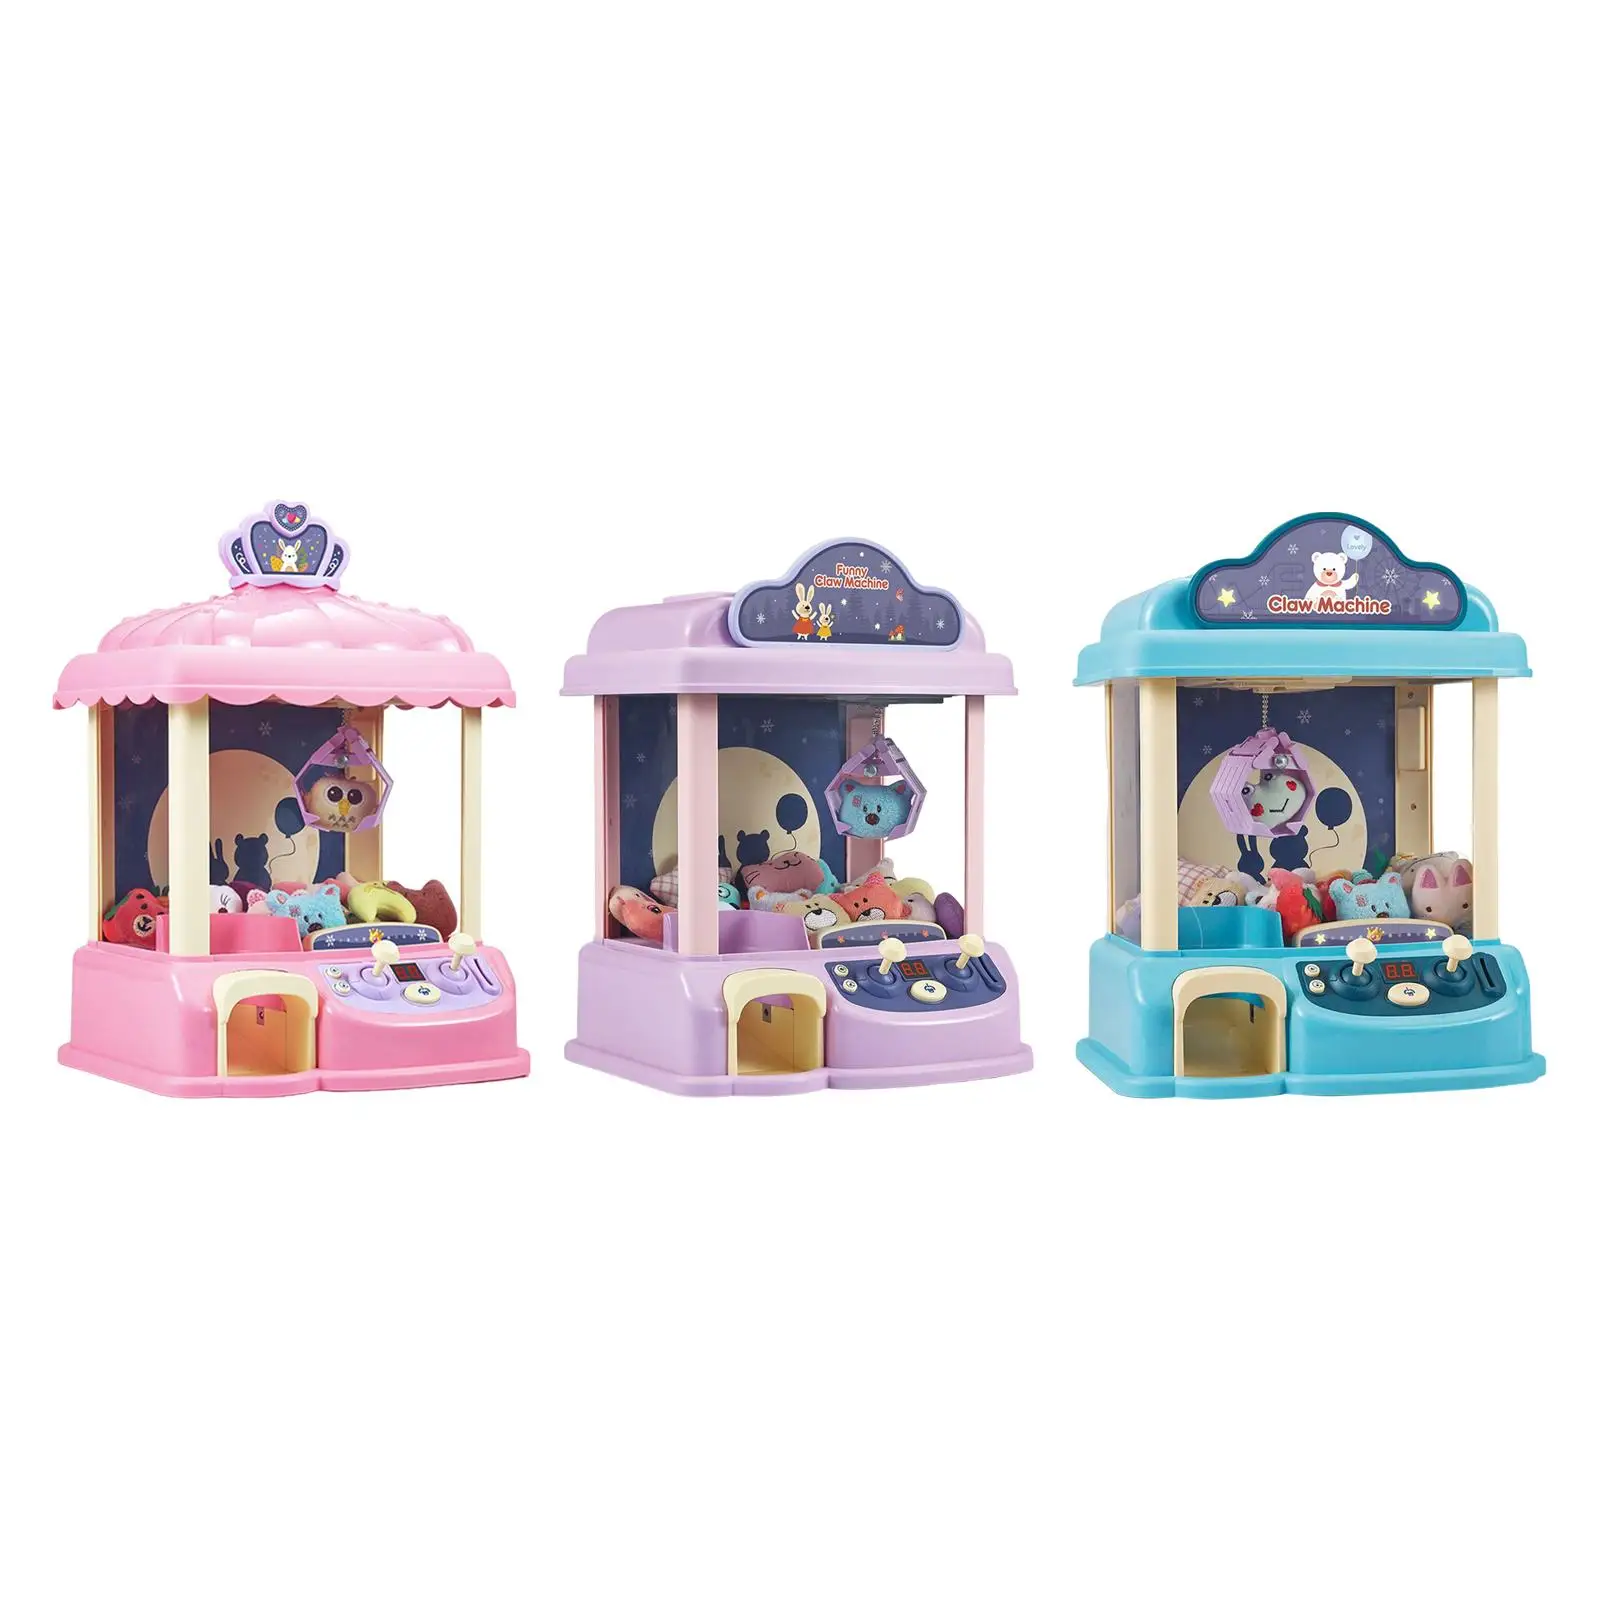 Arcade Game Mini Vending Machine Candy Dispenser Toys with 6 Dolls with Lights and Sound Candy Grabber Claw Machine for Kids